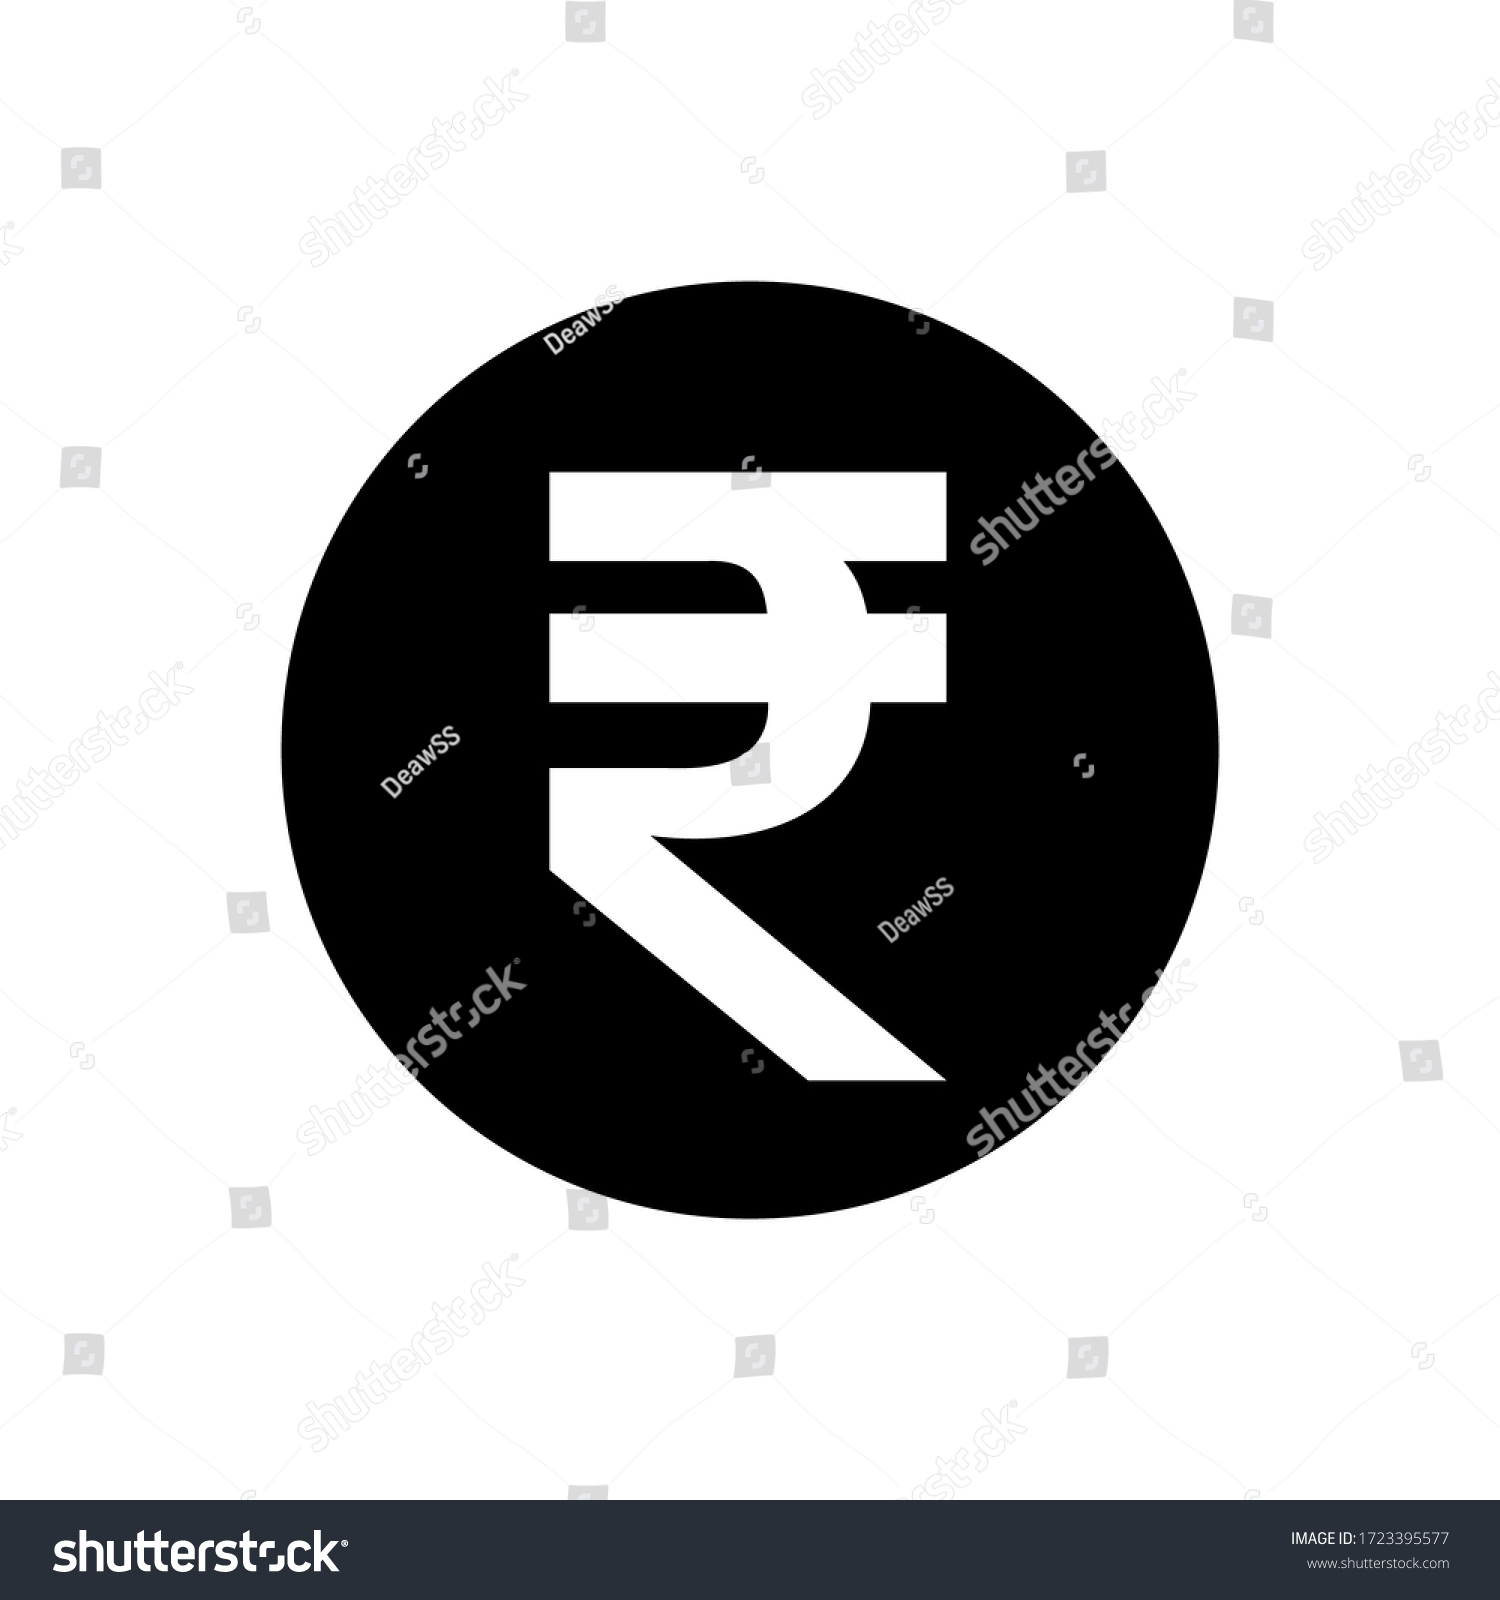 SVG of rupee currency coin black for icon isolated on white, rupee money for app symbol, simple flat rupee money, currency digital rupee coin for financial concept, vector svg